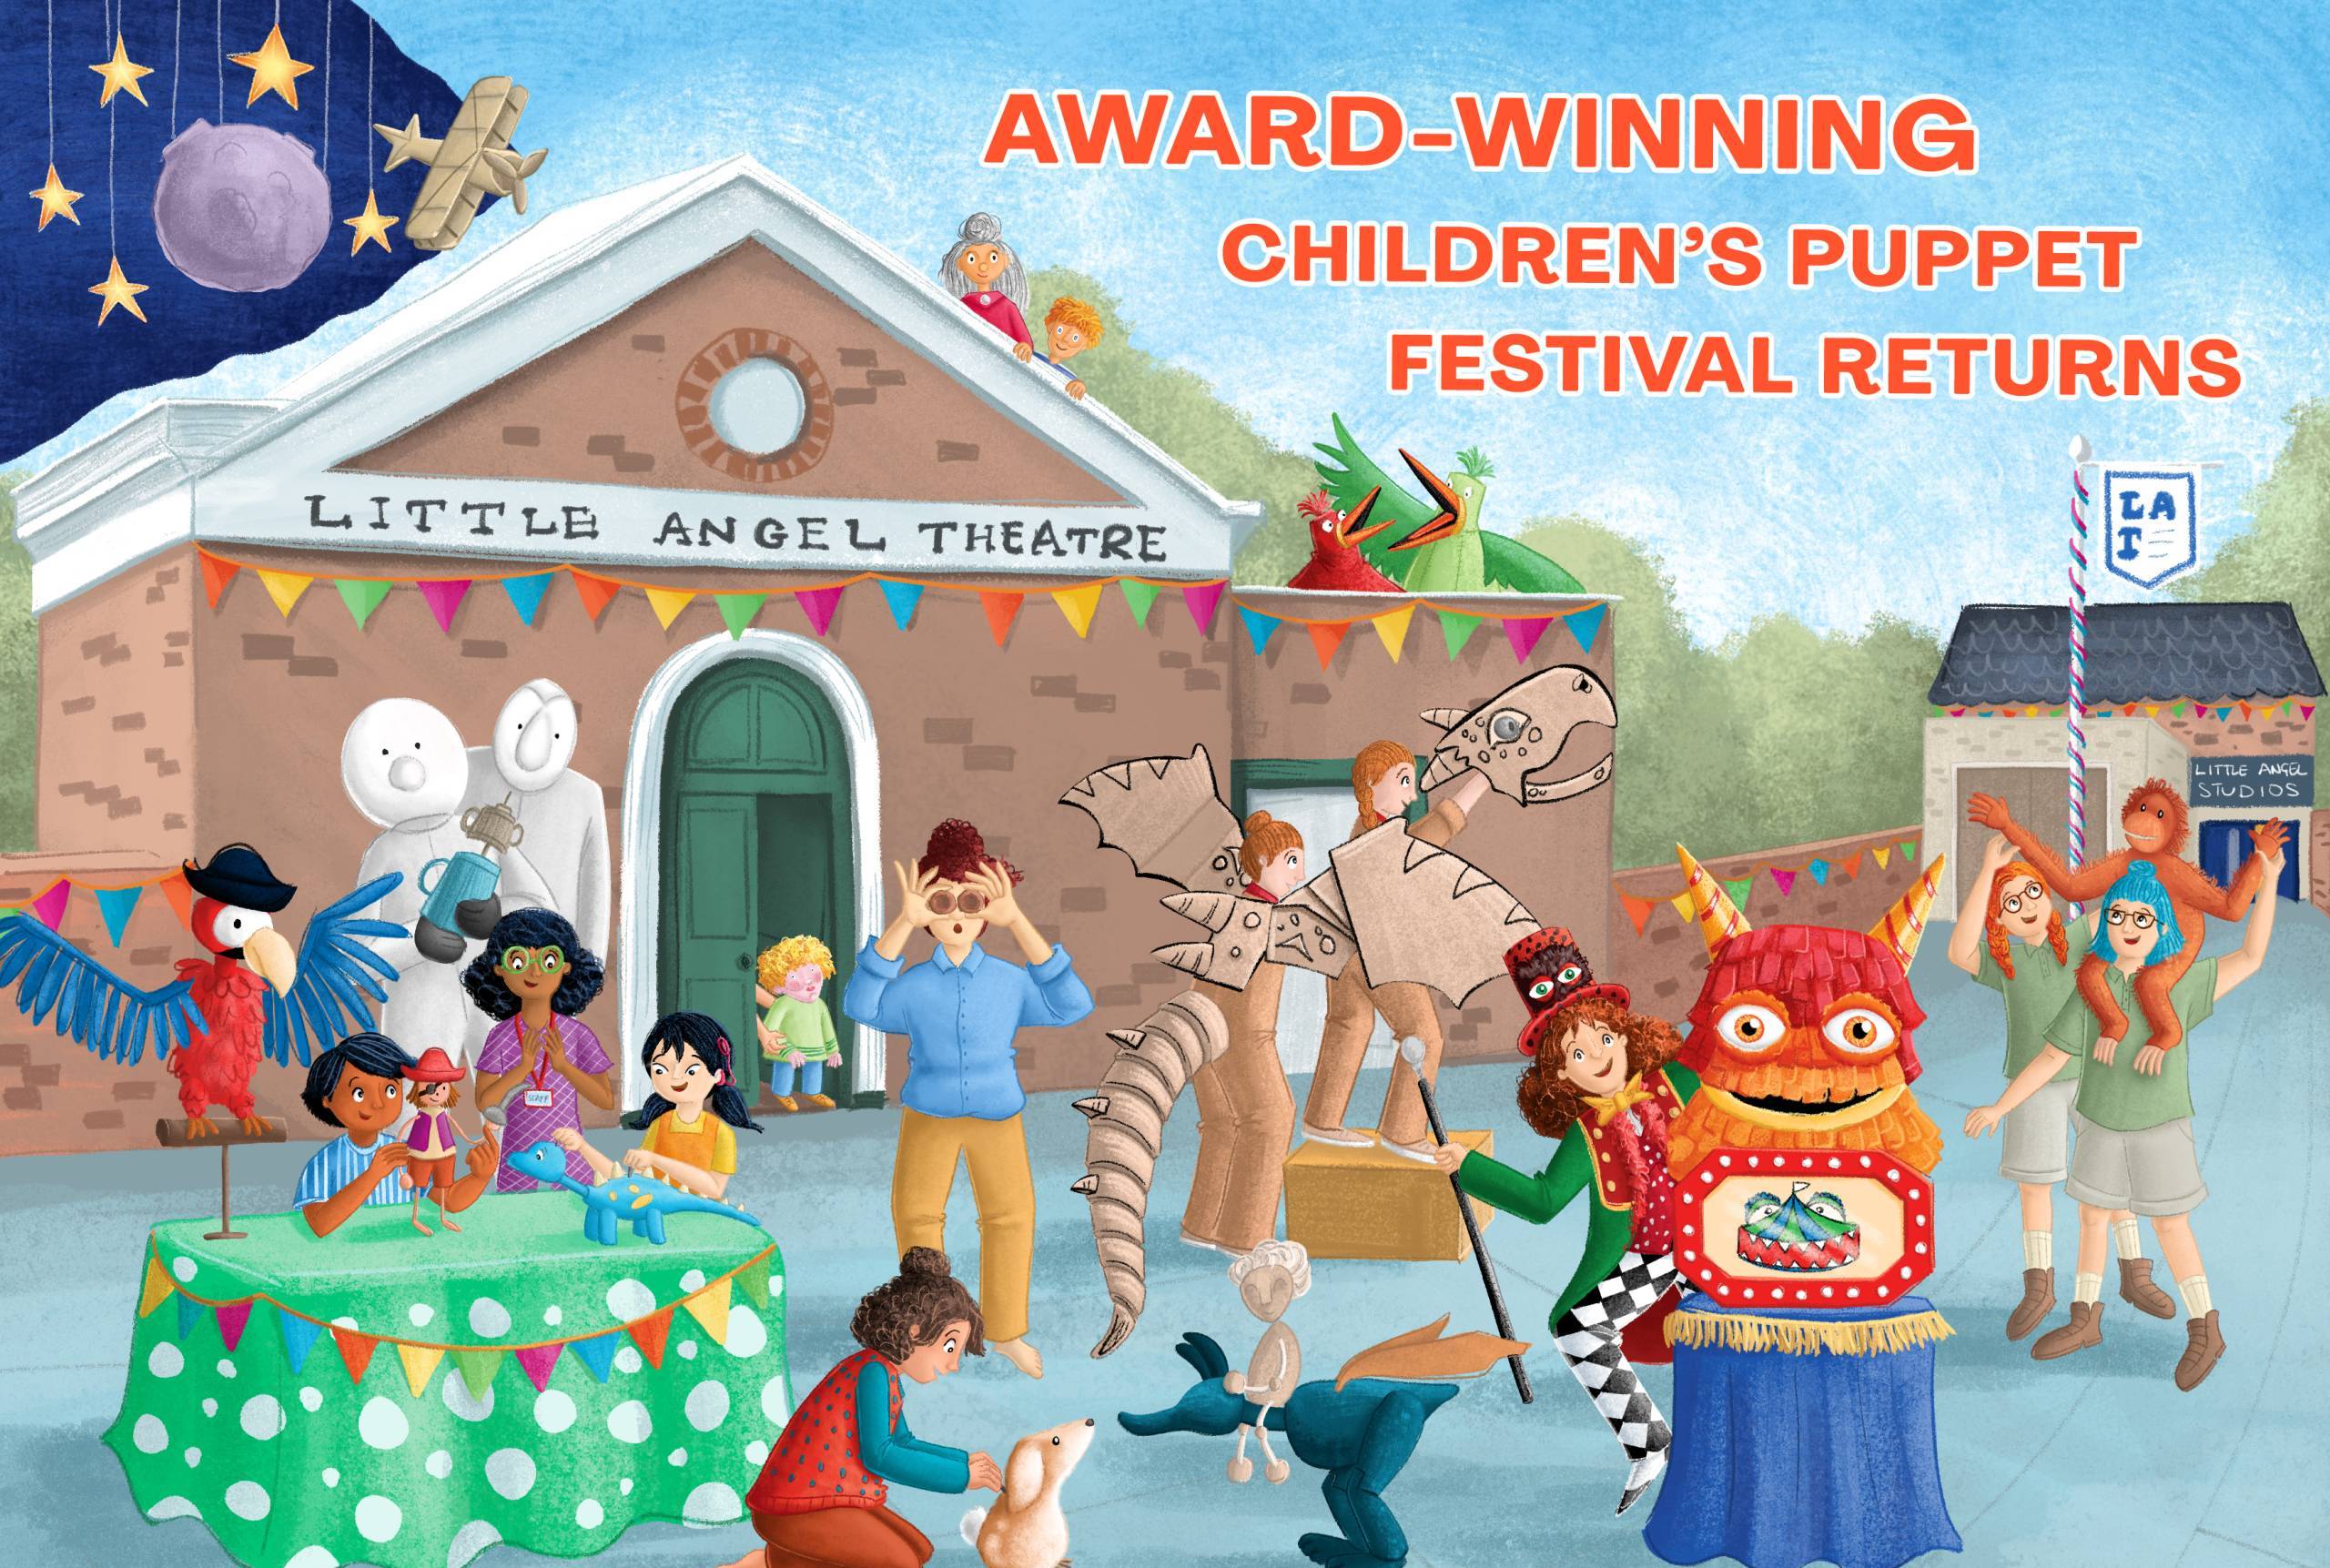 Get 10% off when you book two events + 20% off when you book three or more events at the Children's Puppet Festival. Exclusions apply.